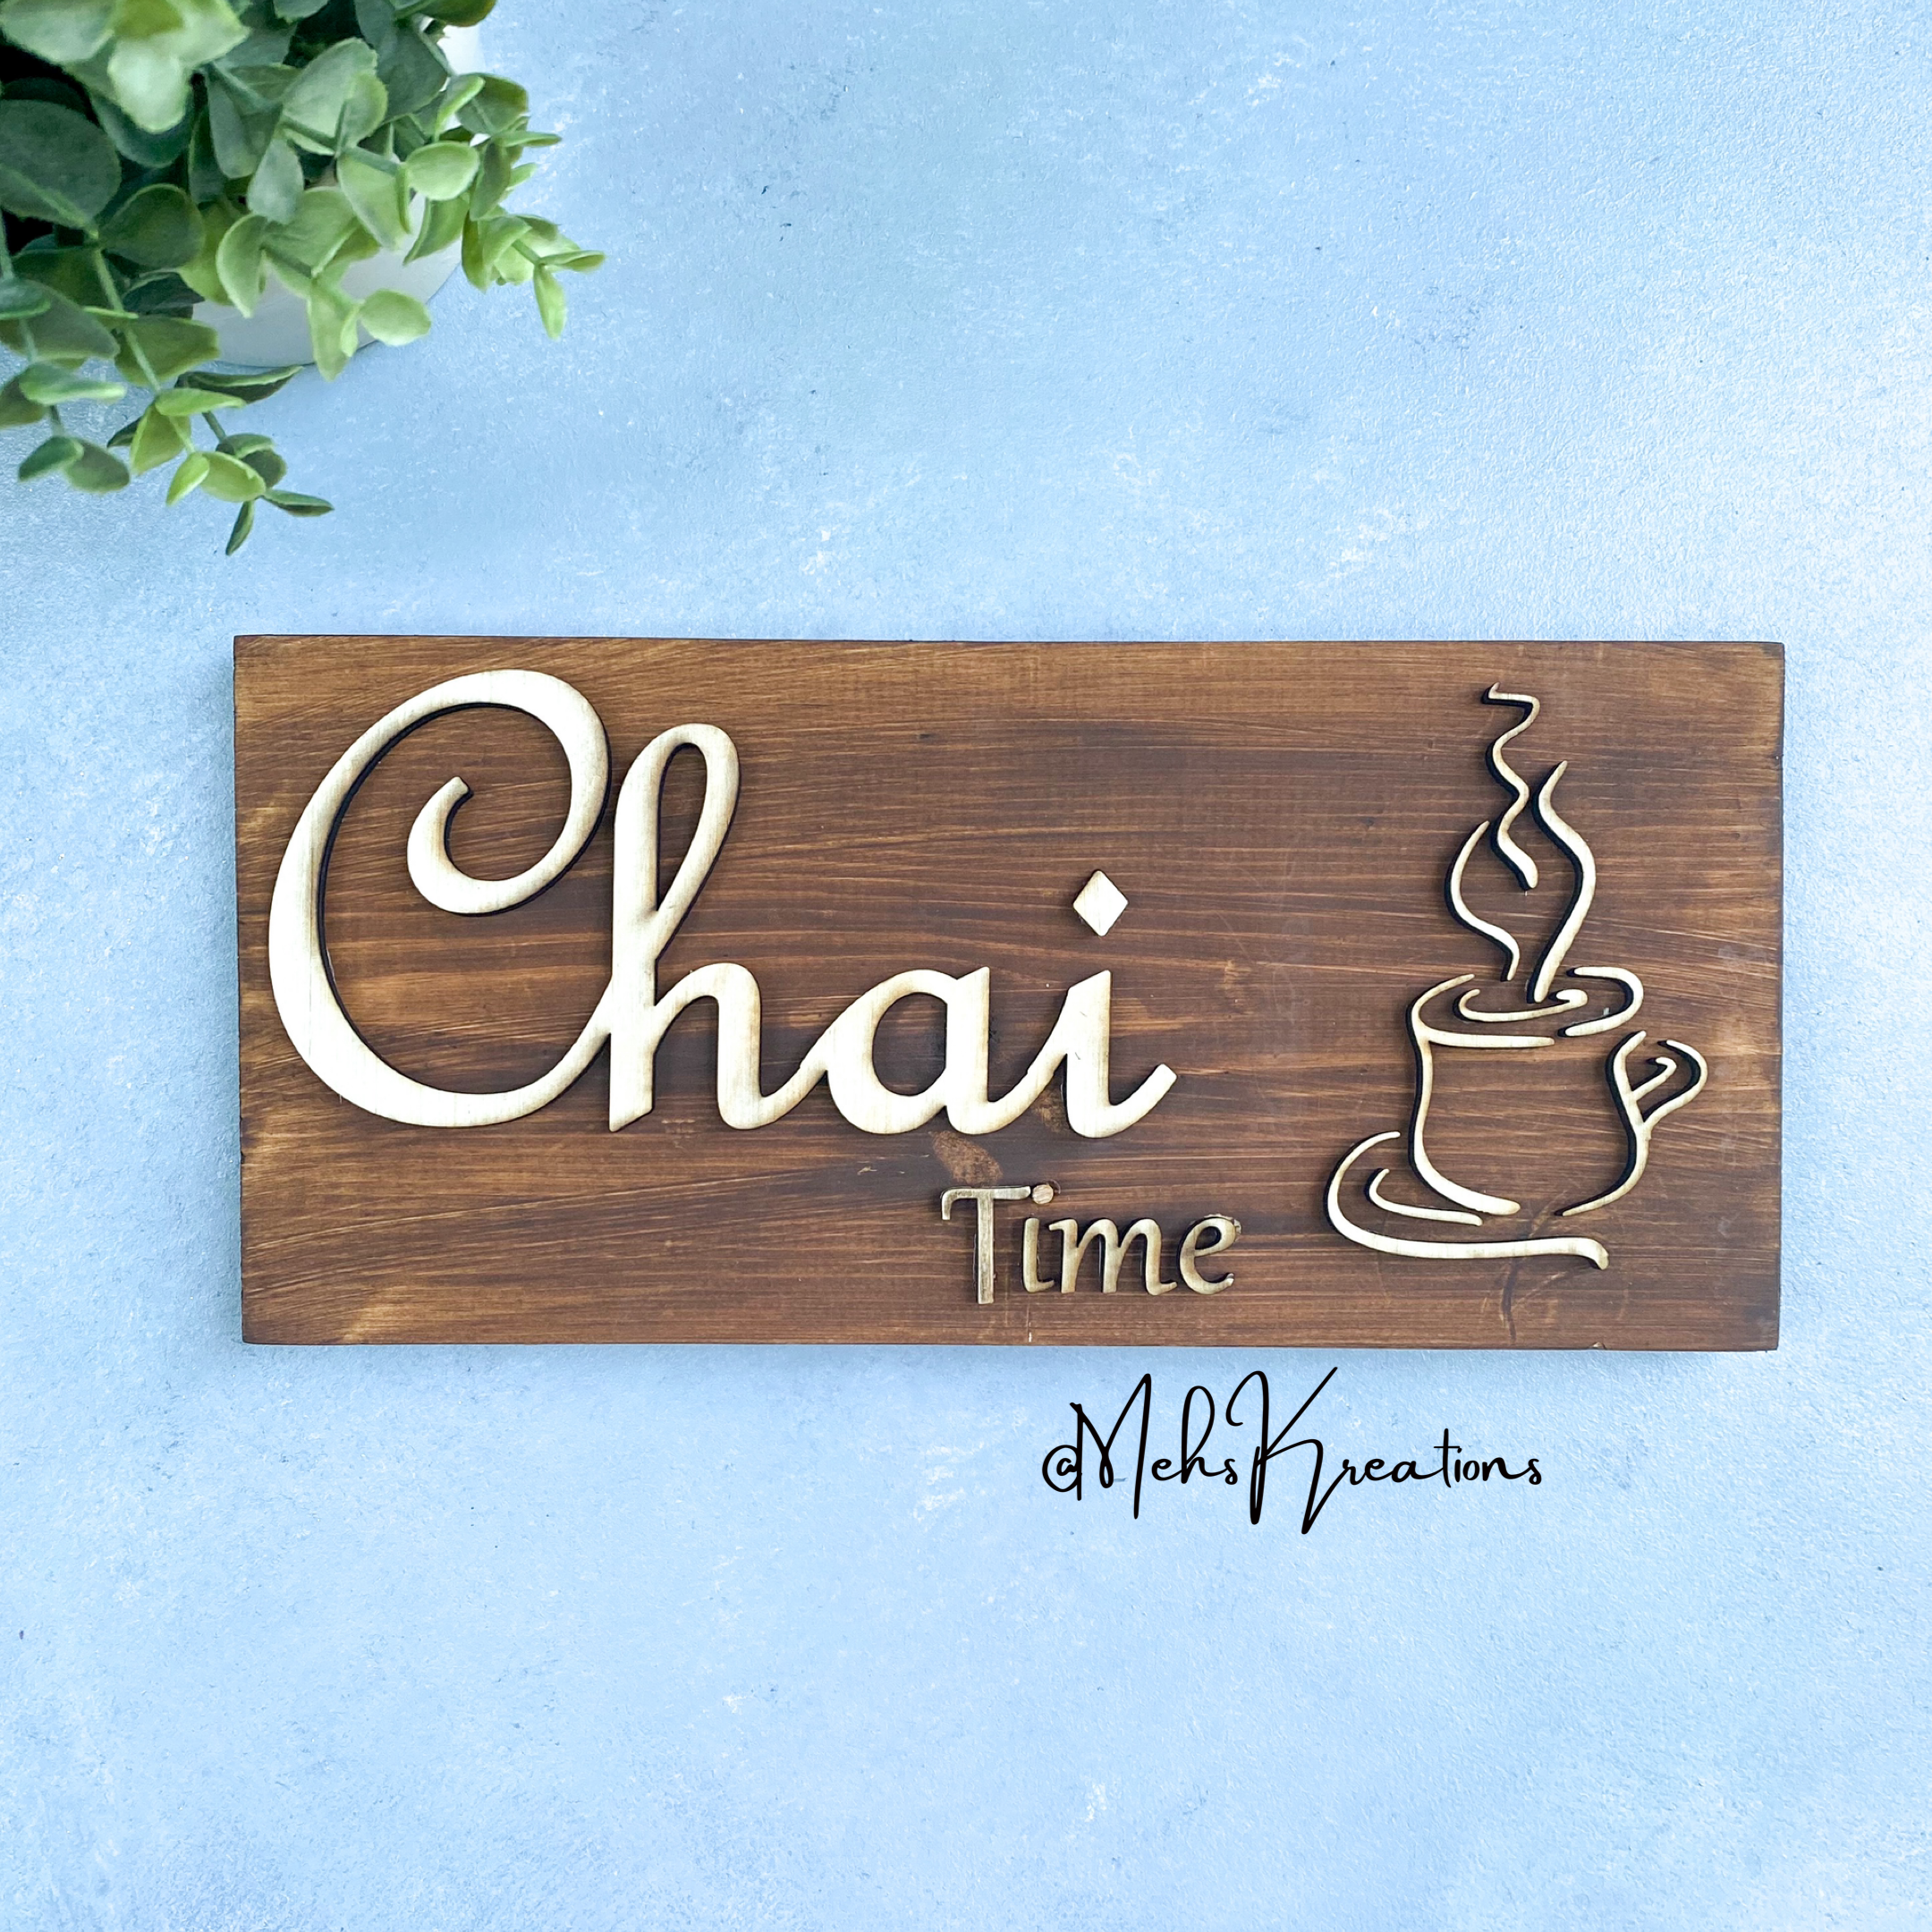 Chai Coffee Projects :: Photos, videos, logos, illustrations and branding  :: Behance